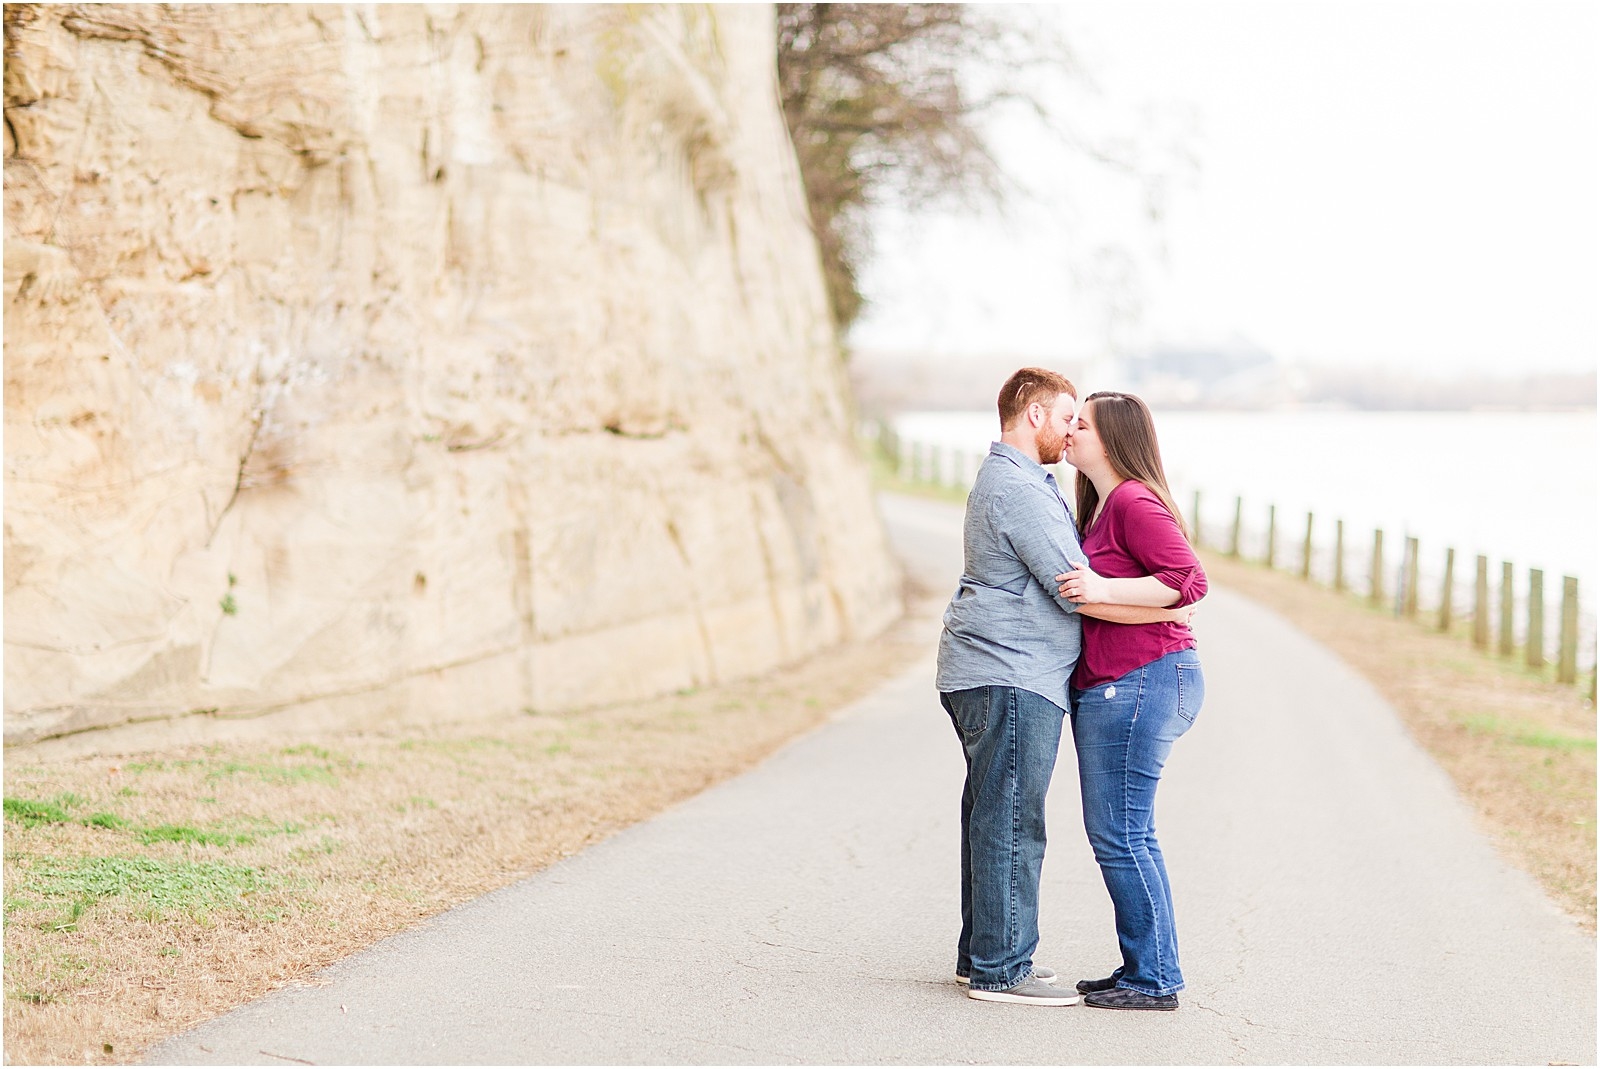 Jocelyn and Austin | Rockport Indiana Engament Session005.jpg